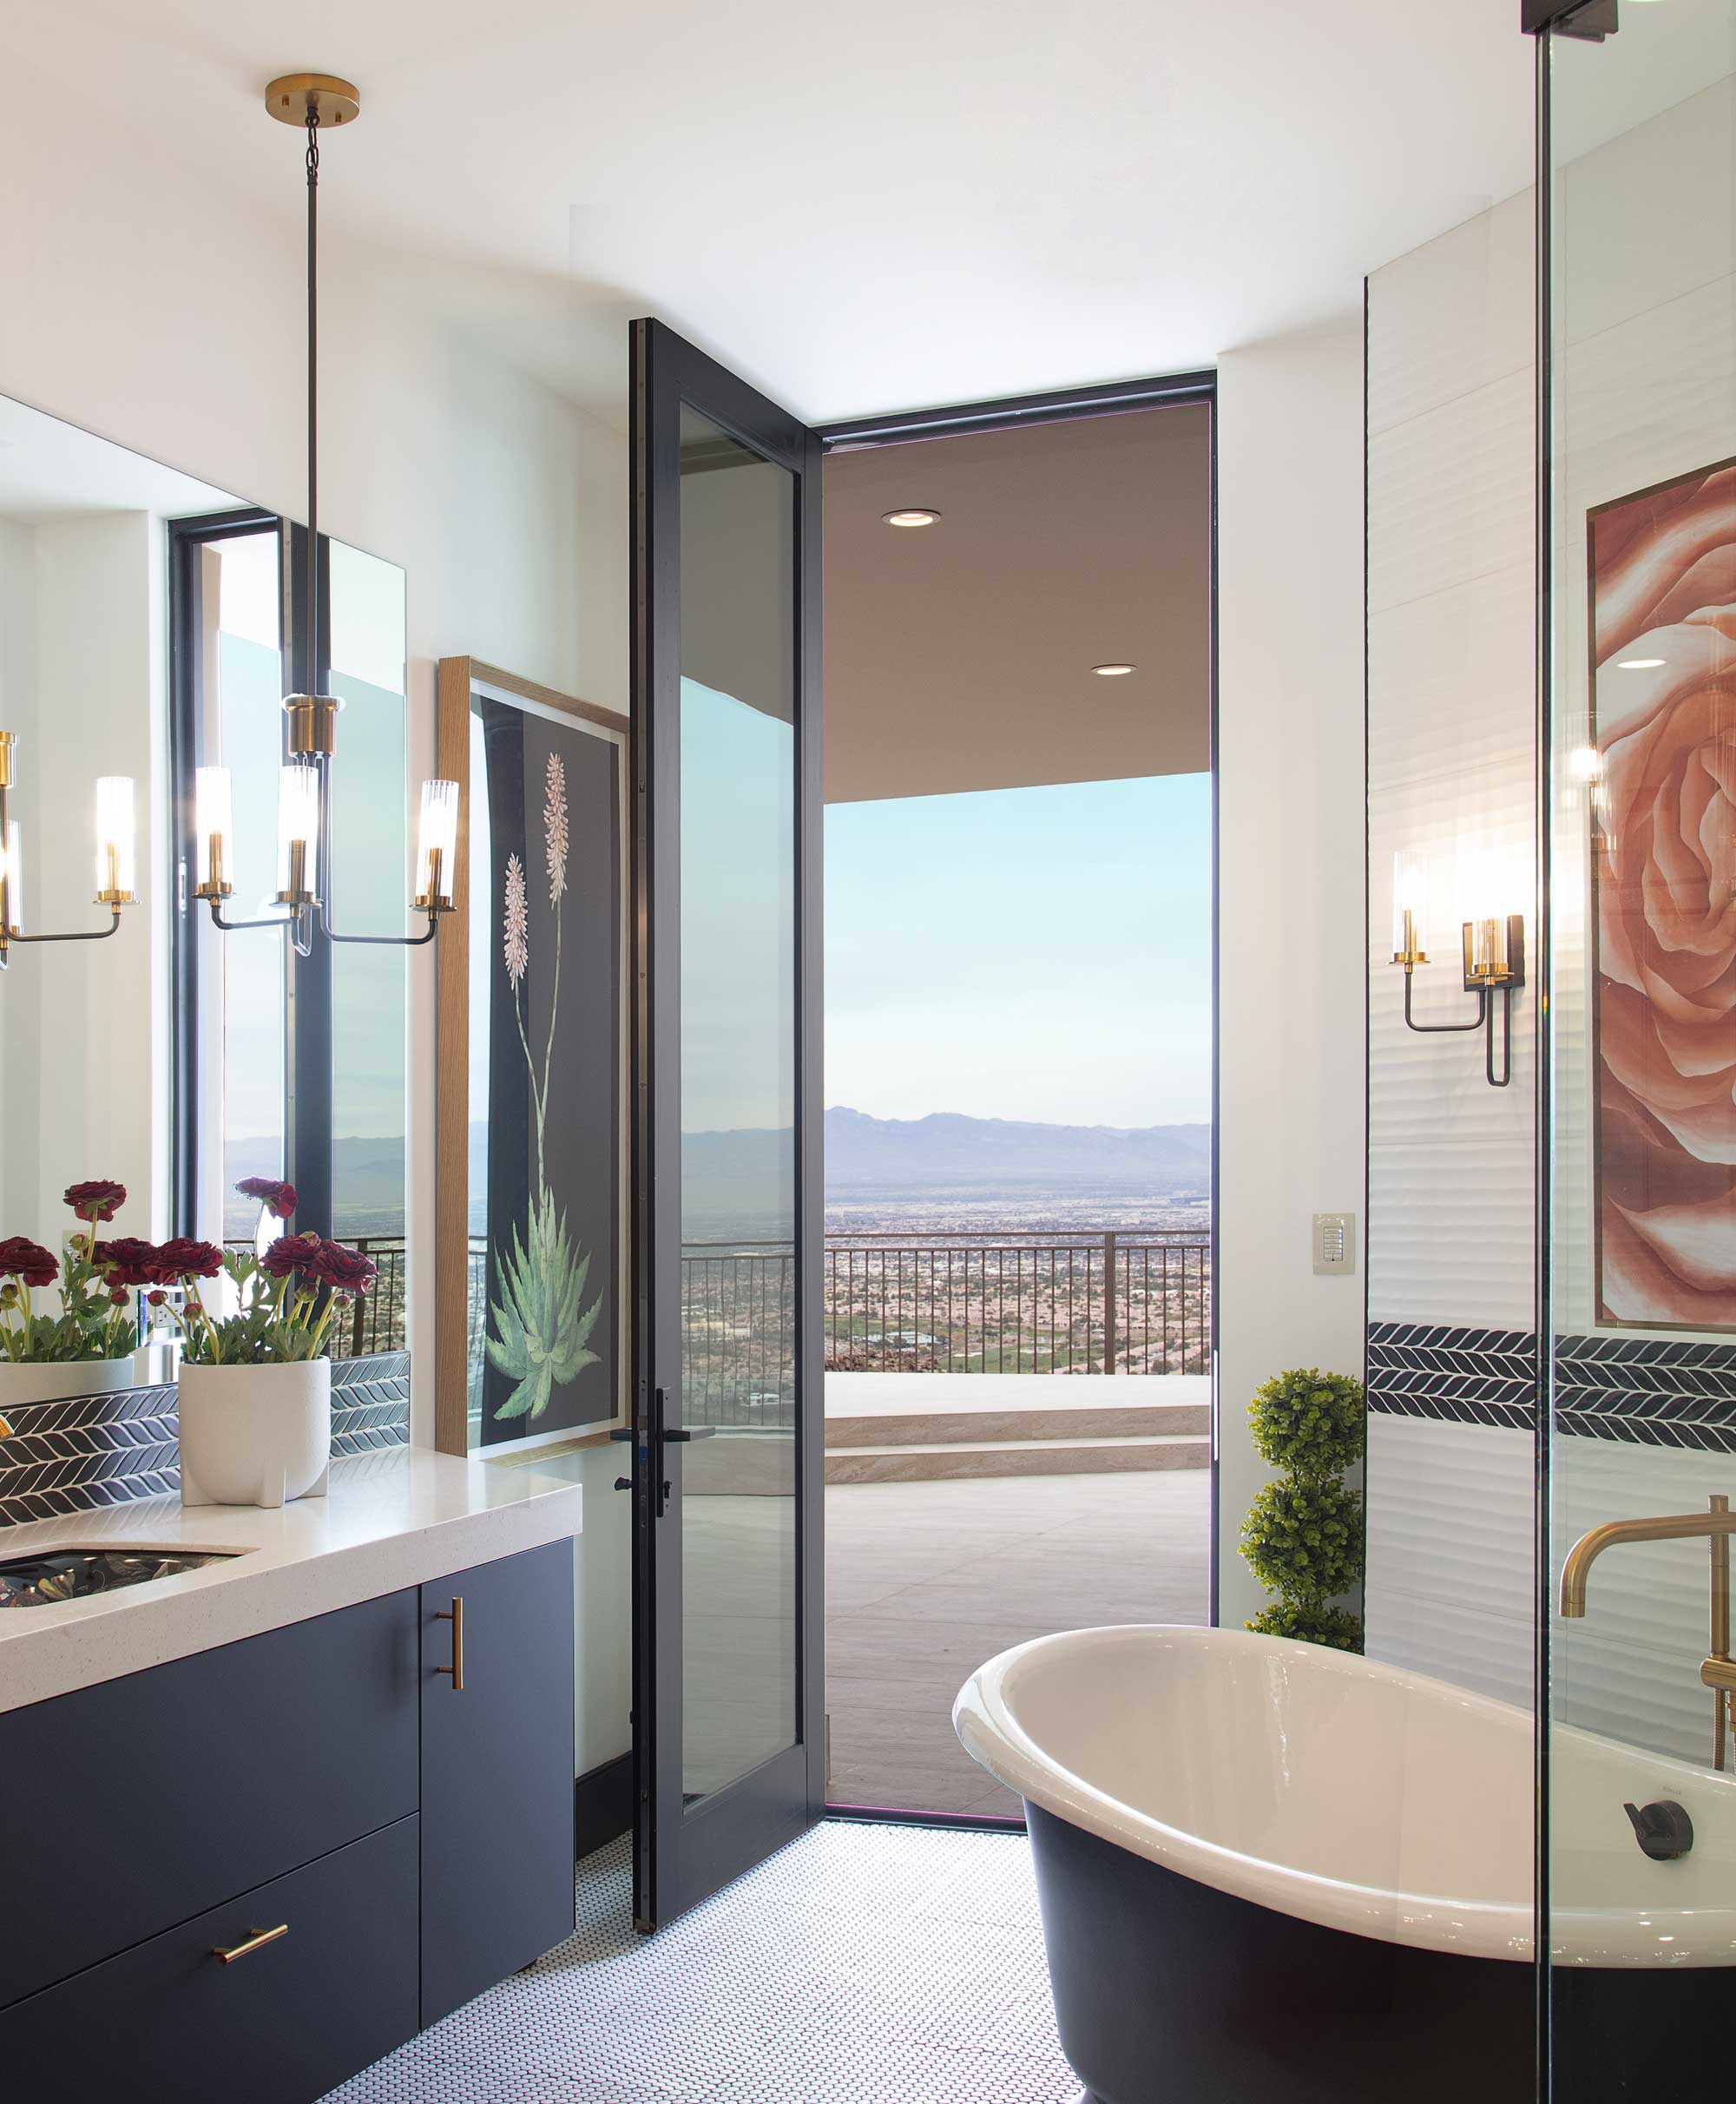 A large hinged door opens the bathroom to a balcony.